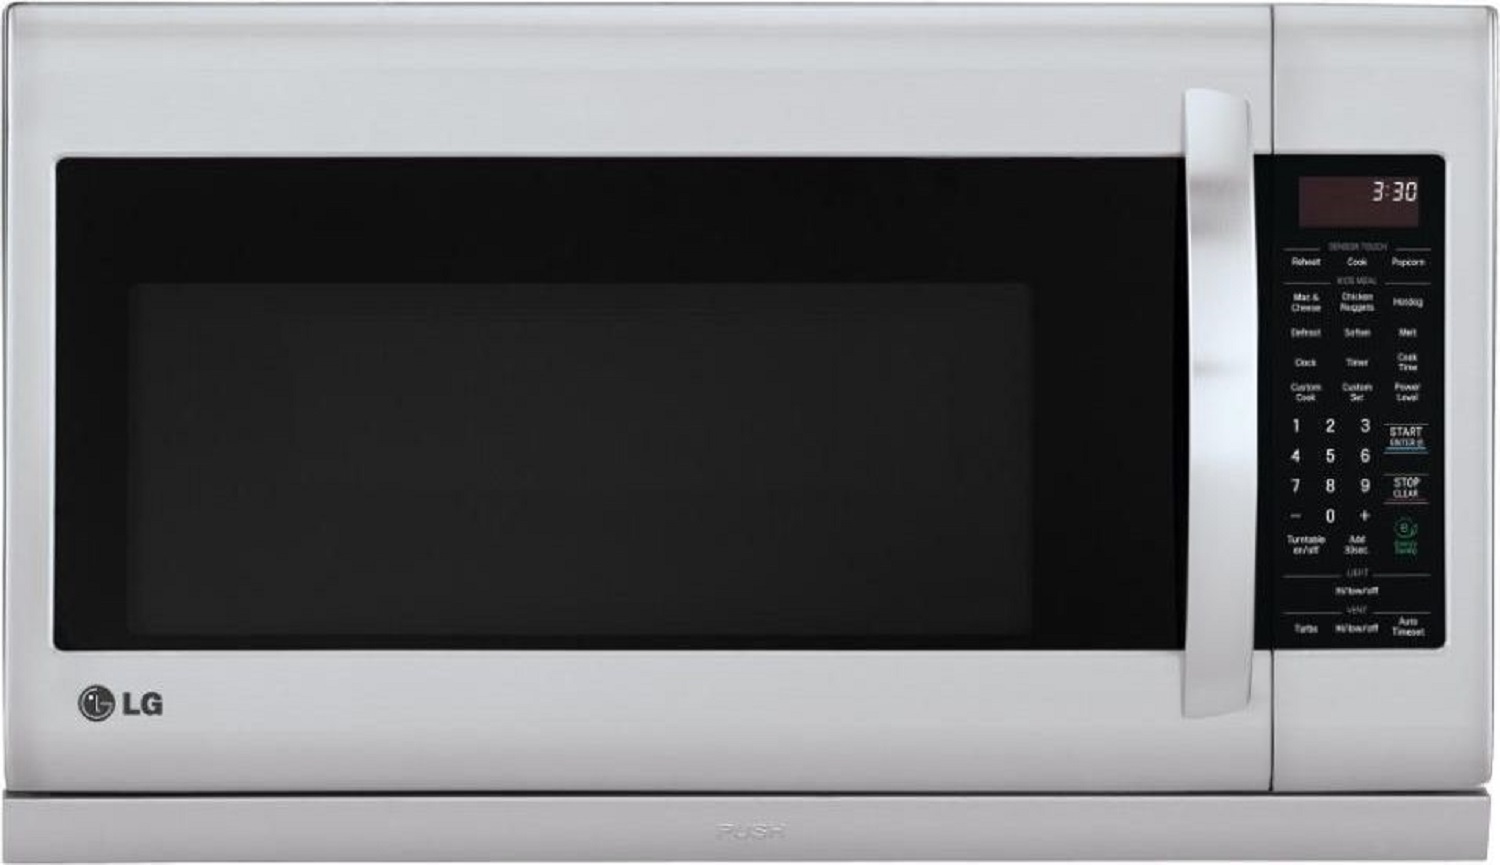 Lg LMH2235ST 30 Inch Over the Range Microwave Oven Stainless Steel